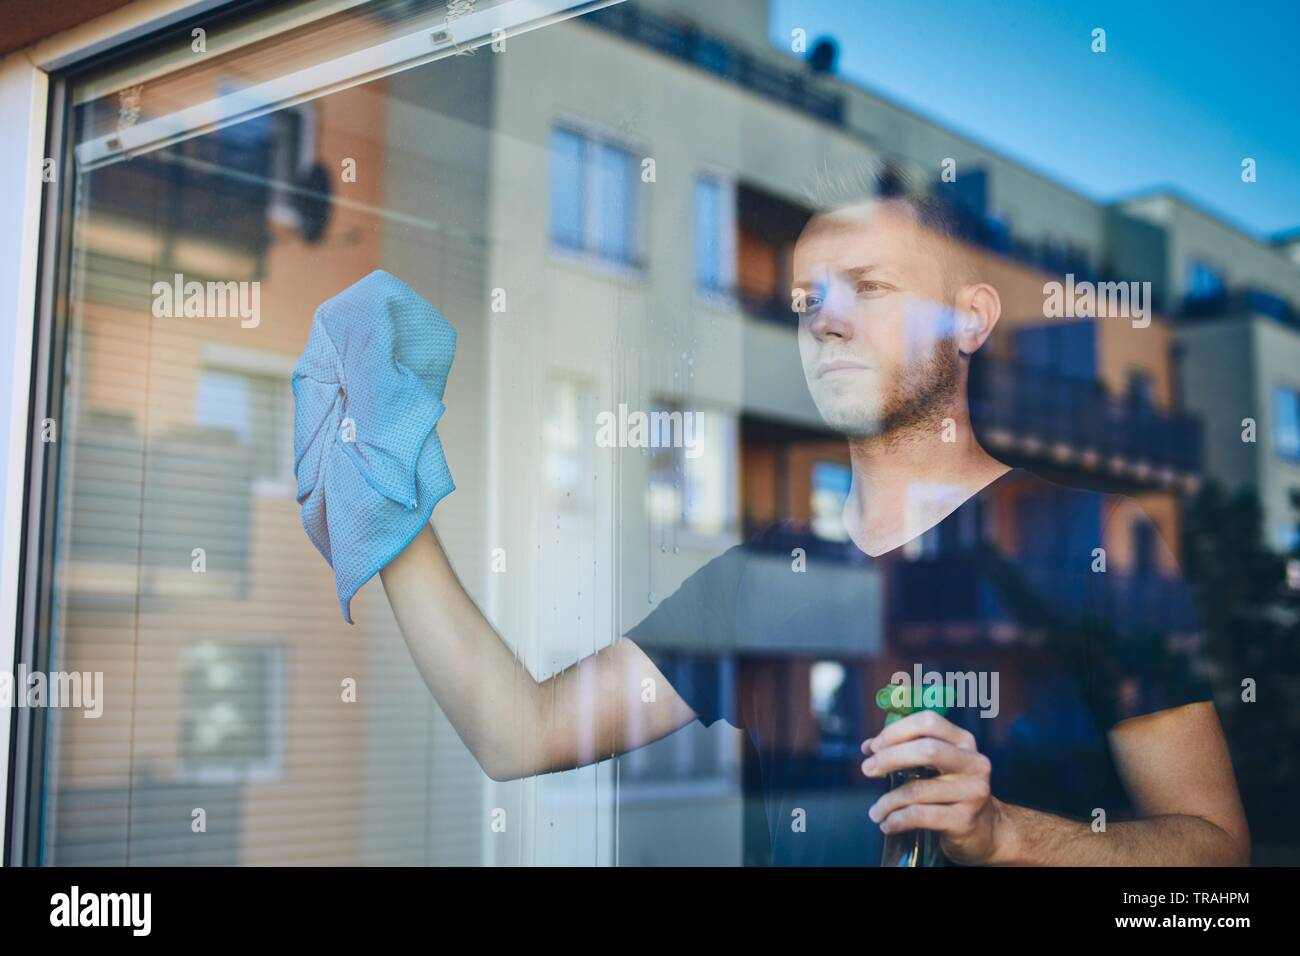 Man cleaning window with rag and cleanser spray at home. Themes housework and housekeeping. Stock Photo